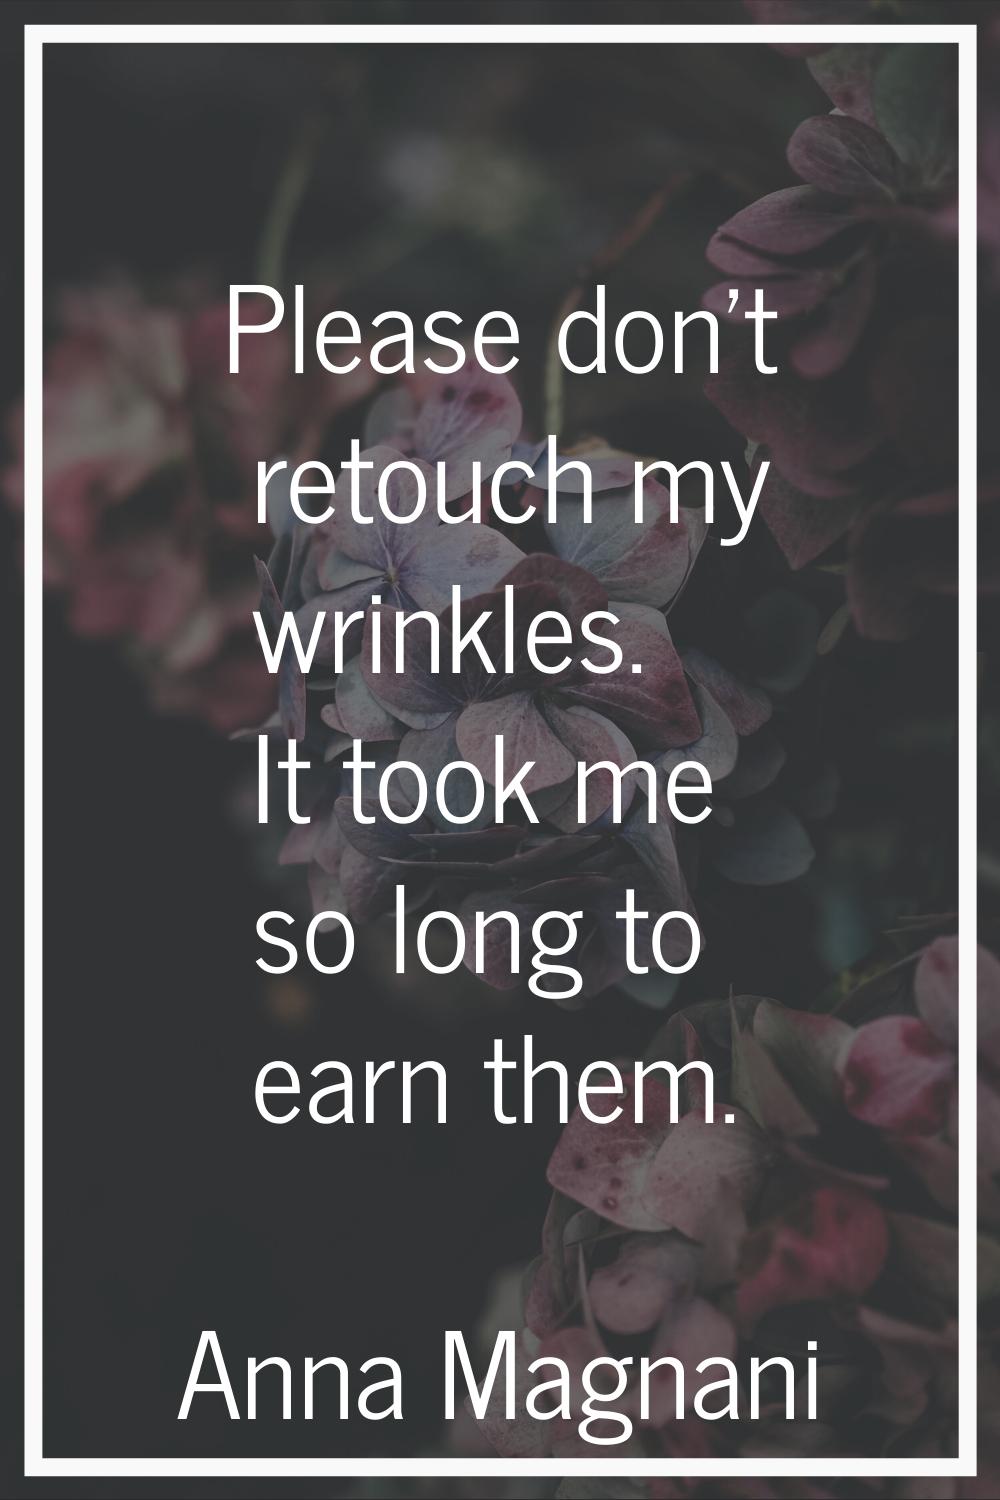 Please don't retouch my wrinkles. It took me so long to earn them.